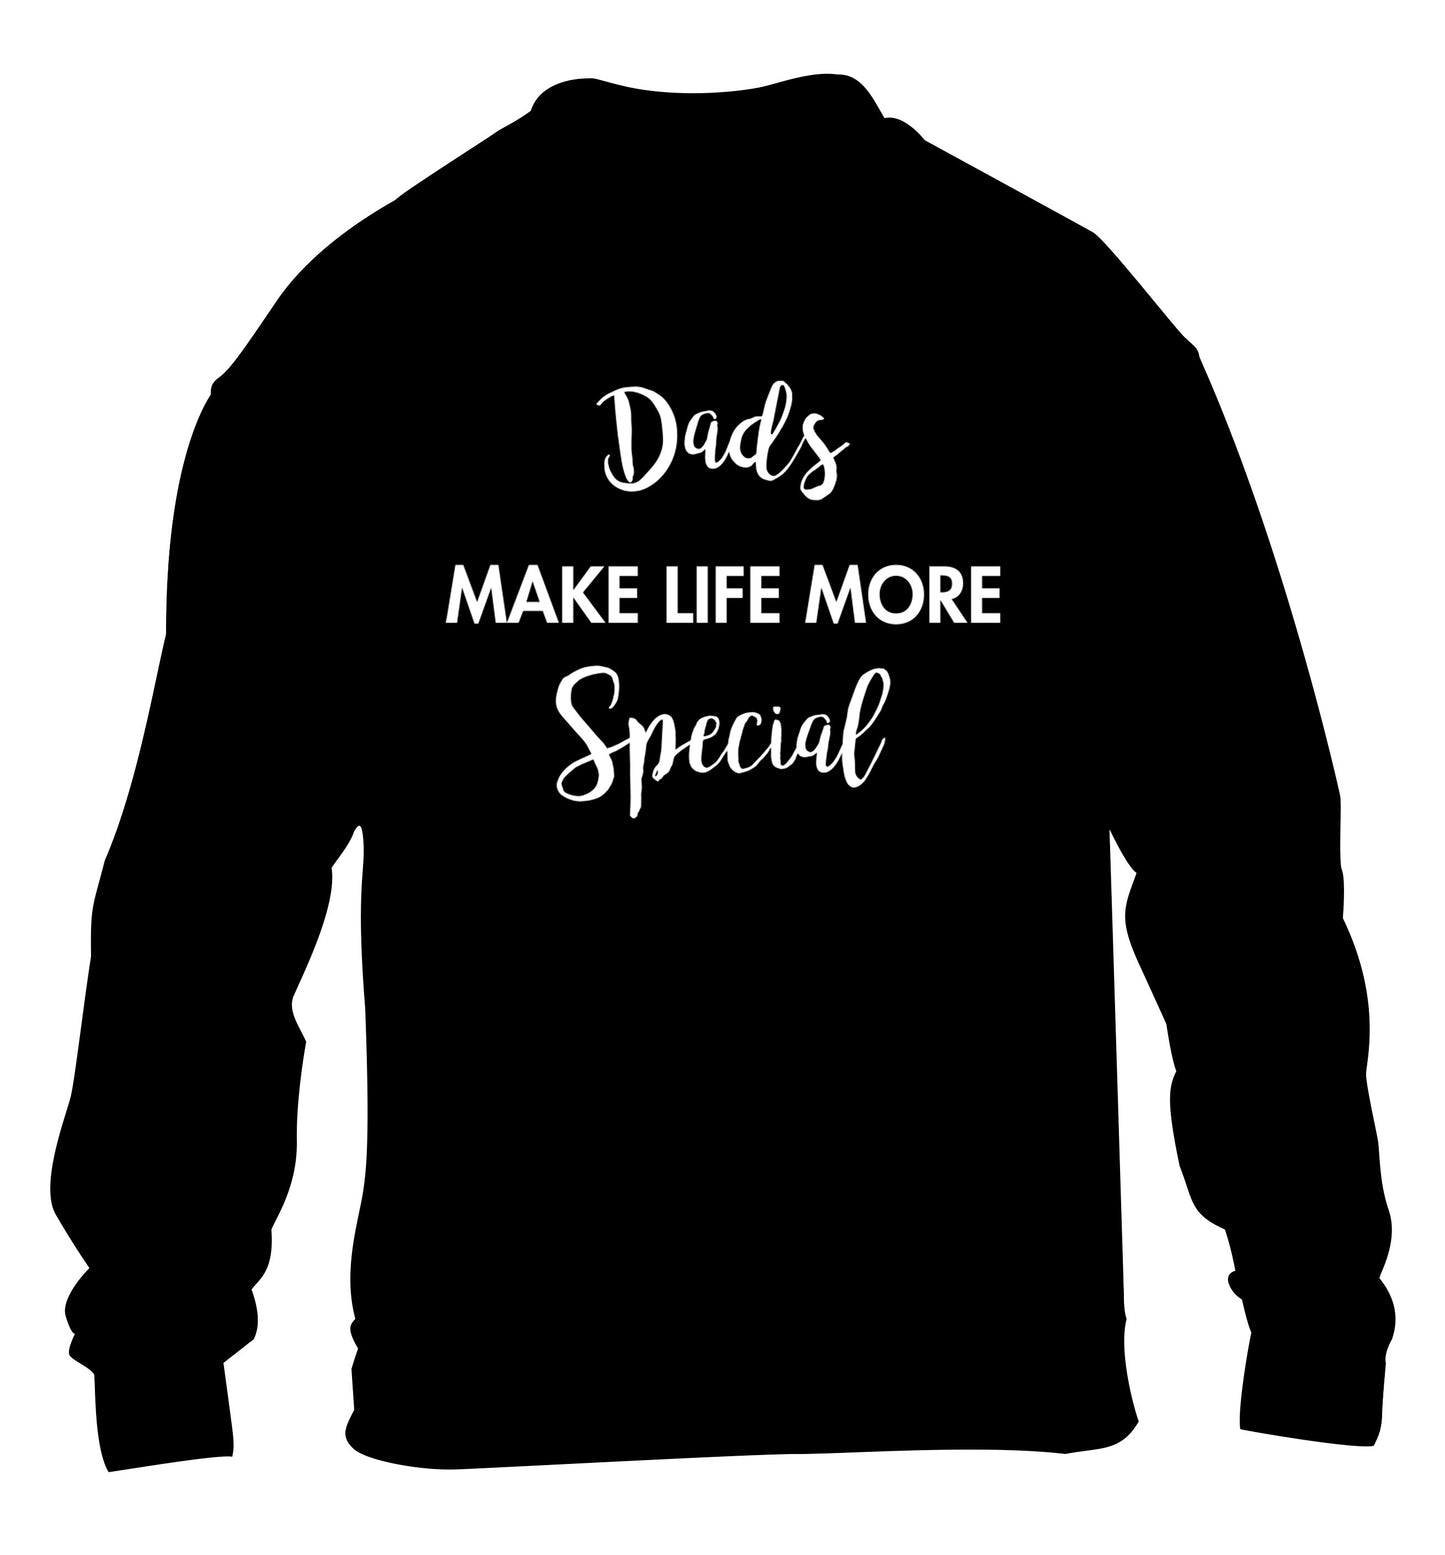 Dads make life more special children's black sweater 12-14 Years